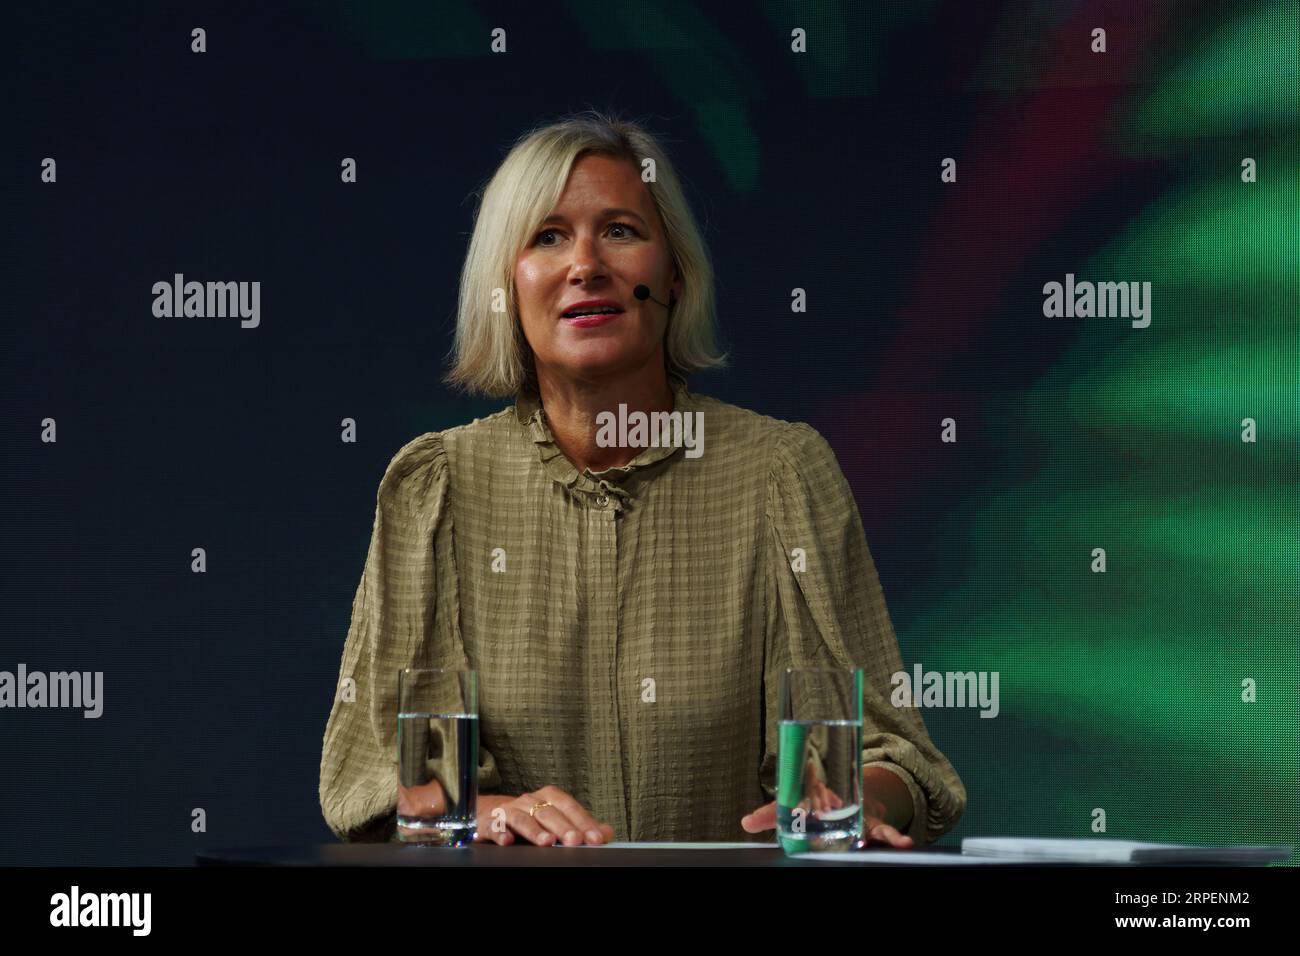 AEG Press conference during IFA 2022 Berlin Stock Photo